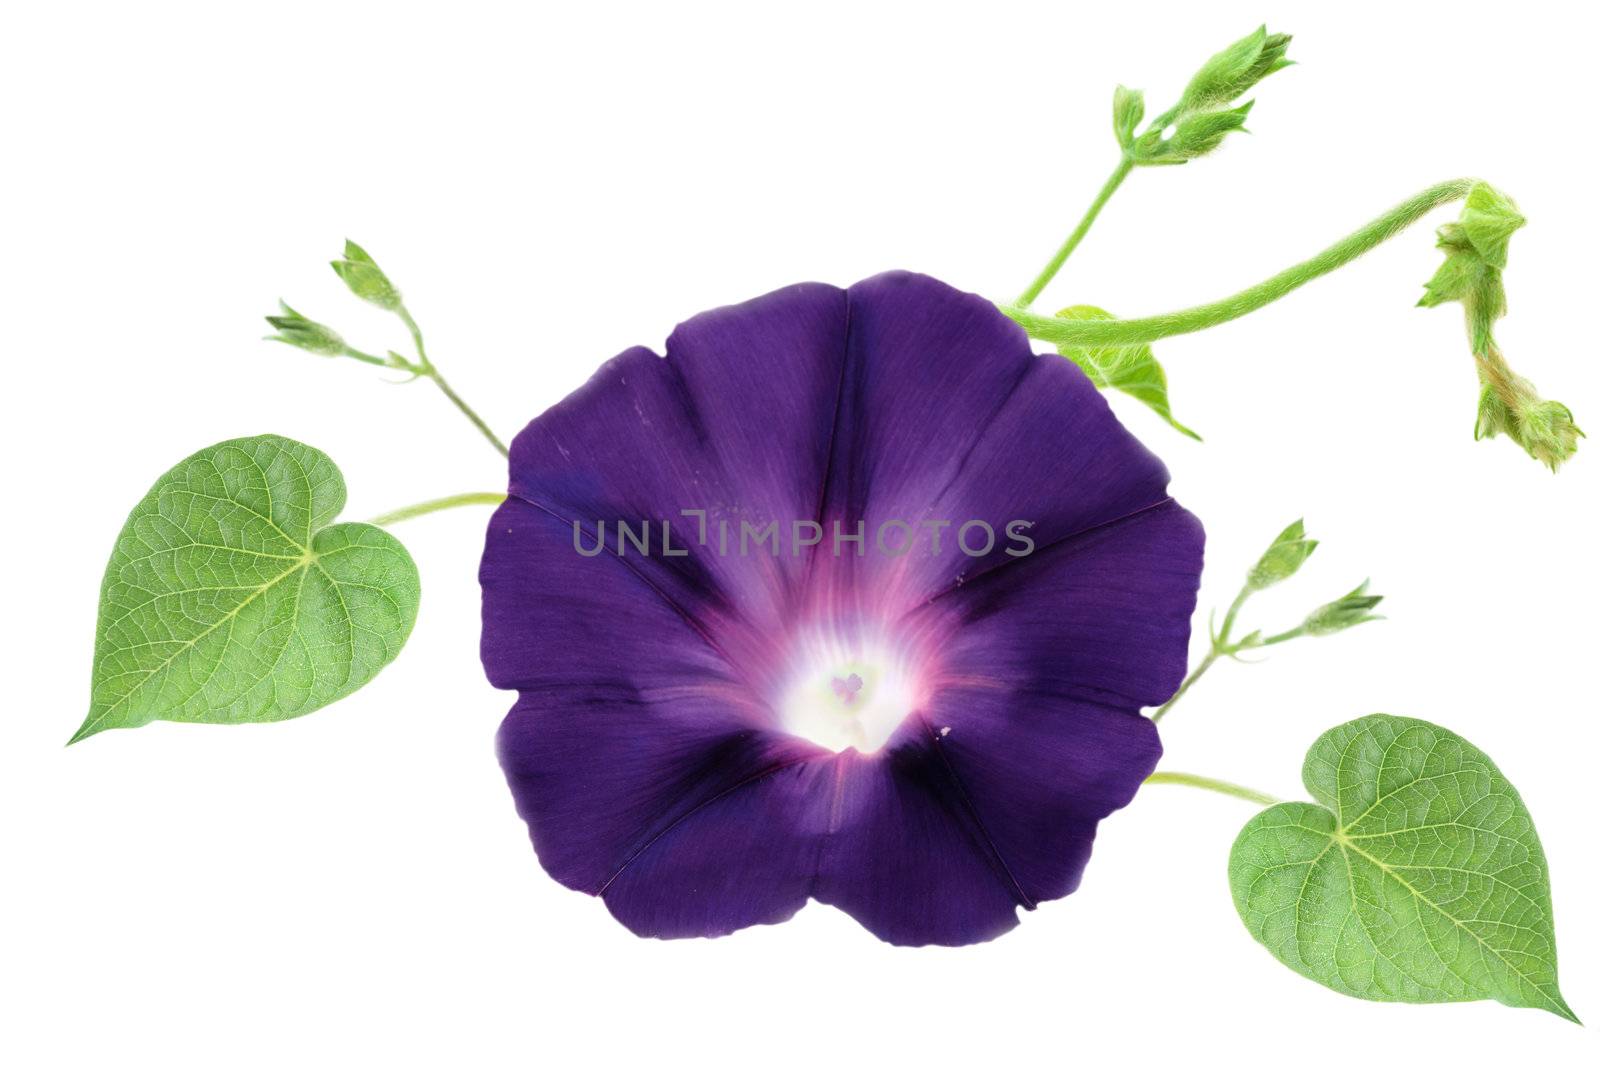 Isolated Morning Glory with vines and leaves on a white background.